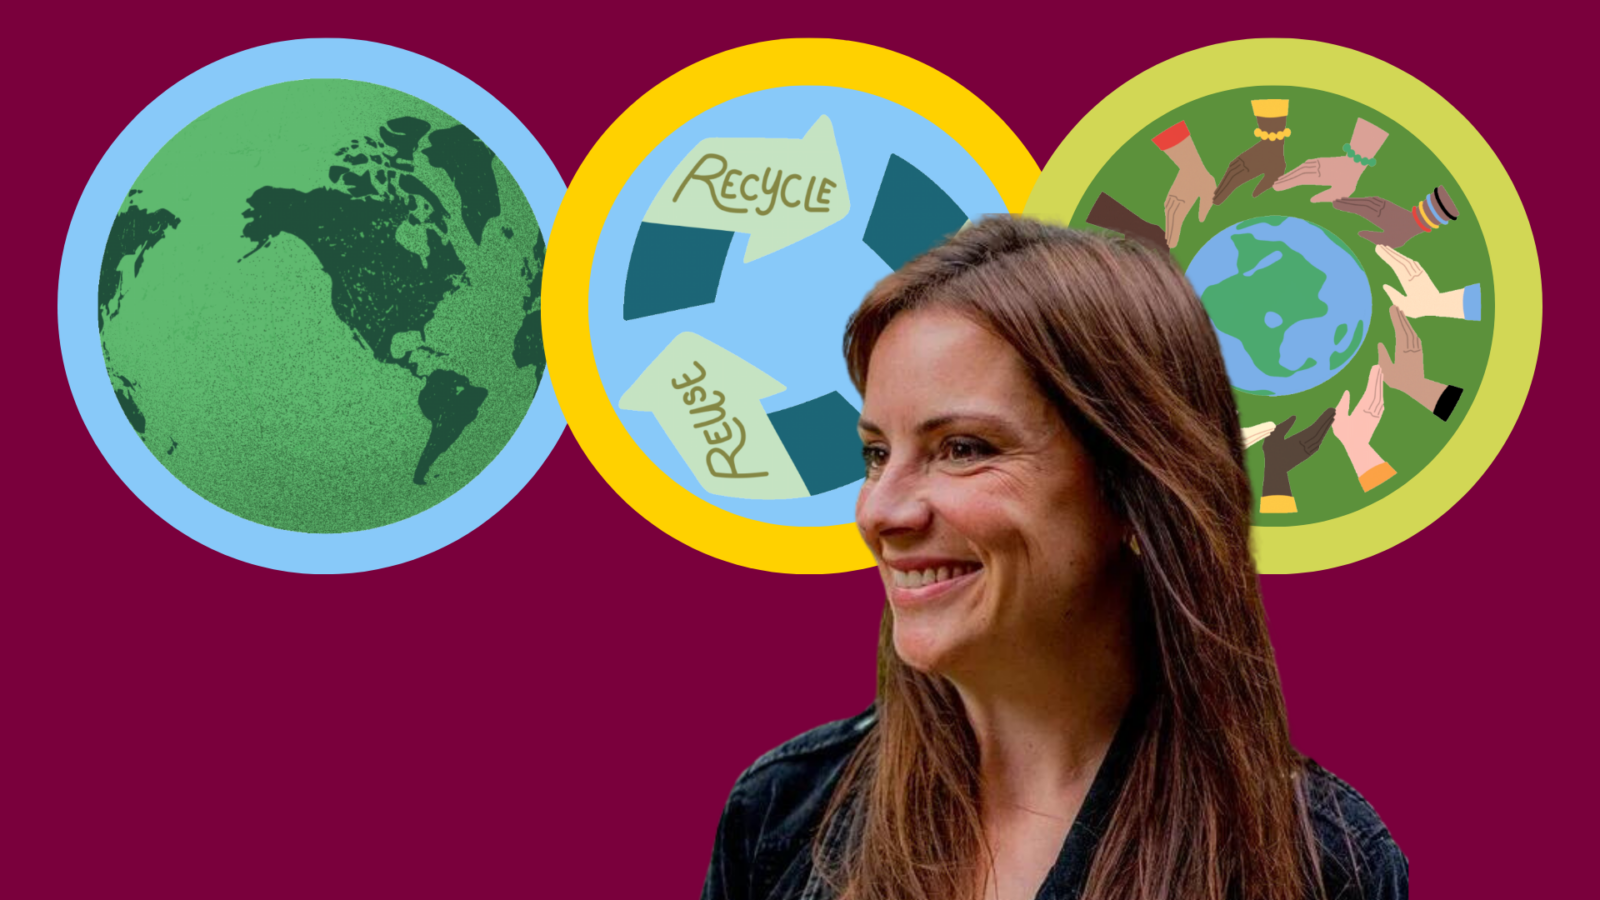 Lindsay Hampson, EMBA '22, smiling, on a maroon background with three circle depicting a green globe, symbols for reduce, reuse, recycle, and hands surrounding a globe.